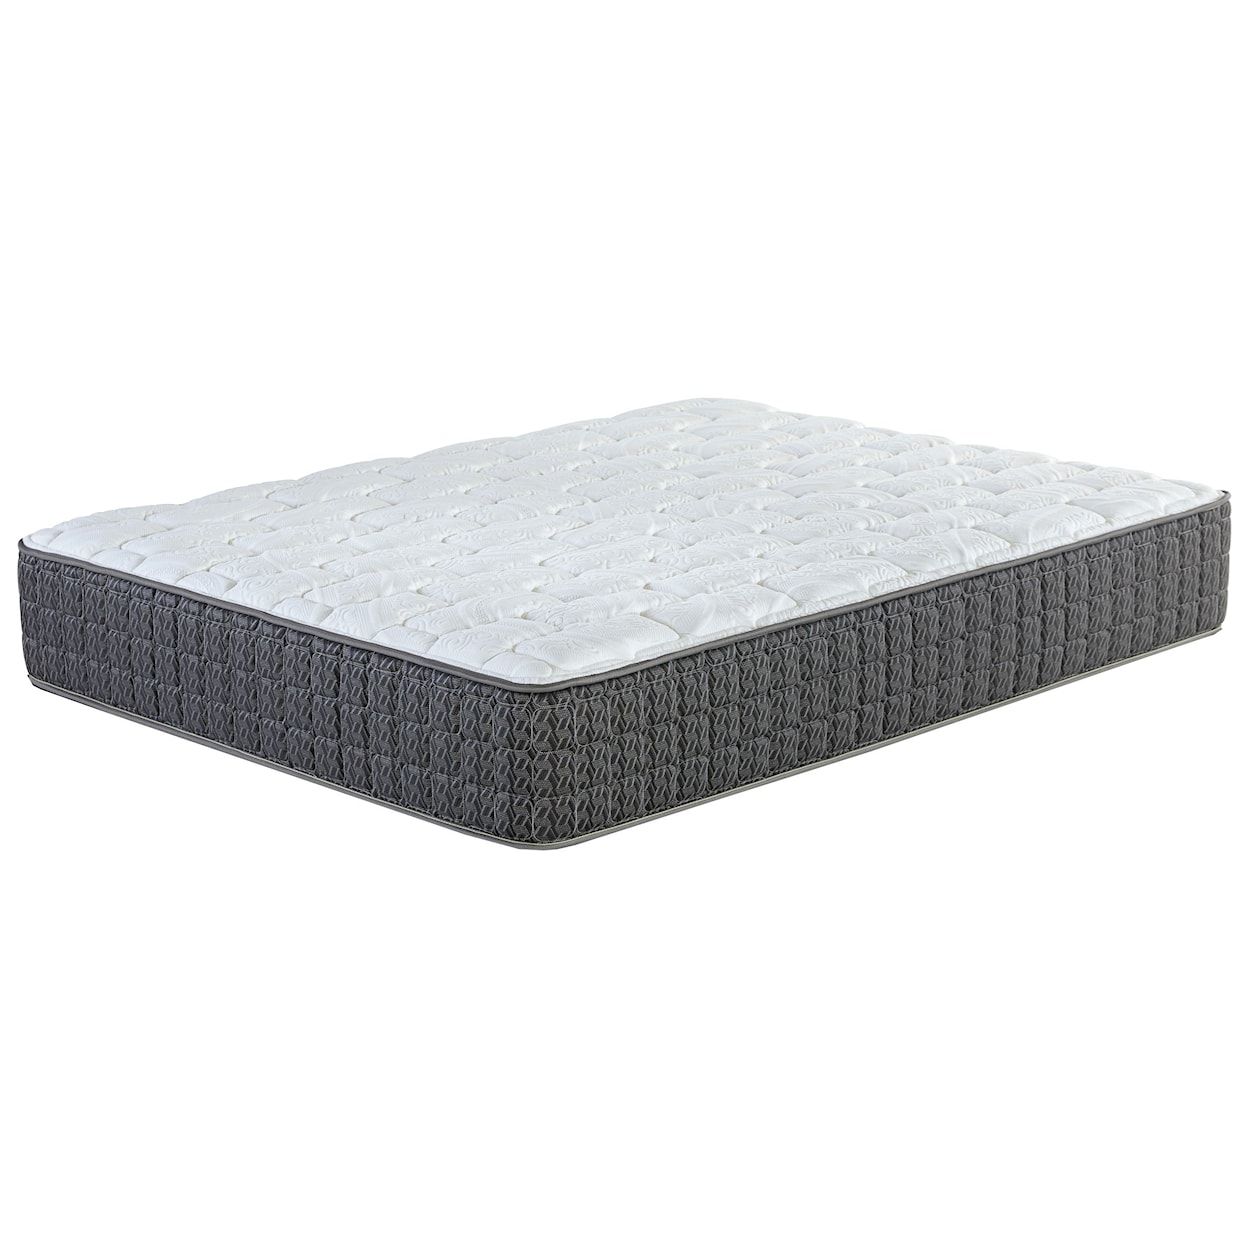 Corsicana Kinley Firm King Firm Pocketed Coil Mattress